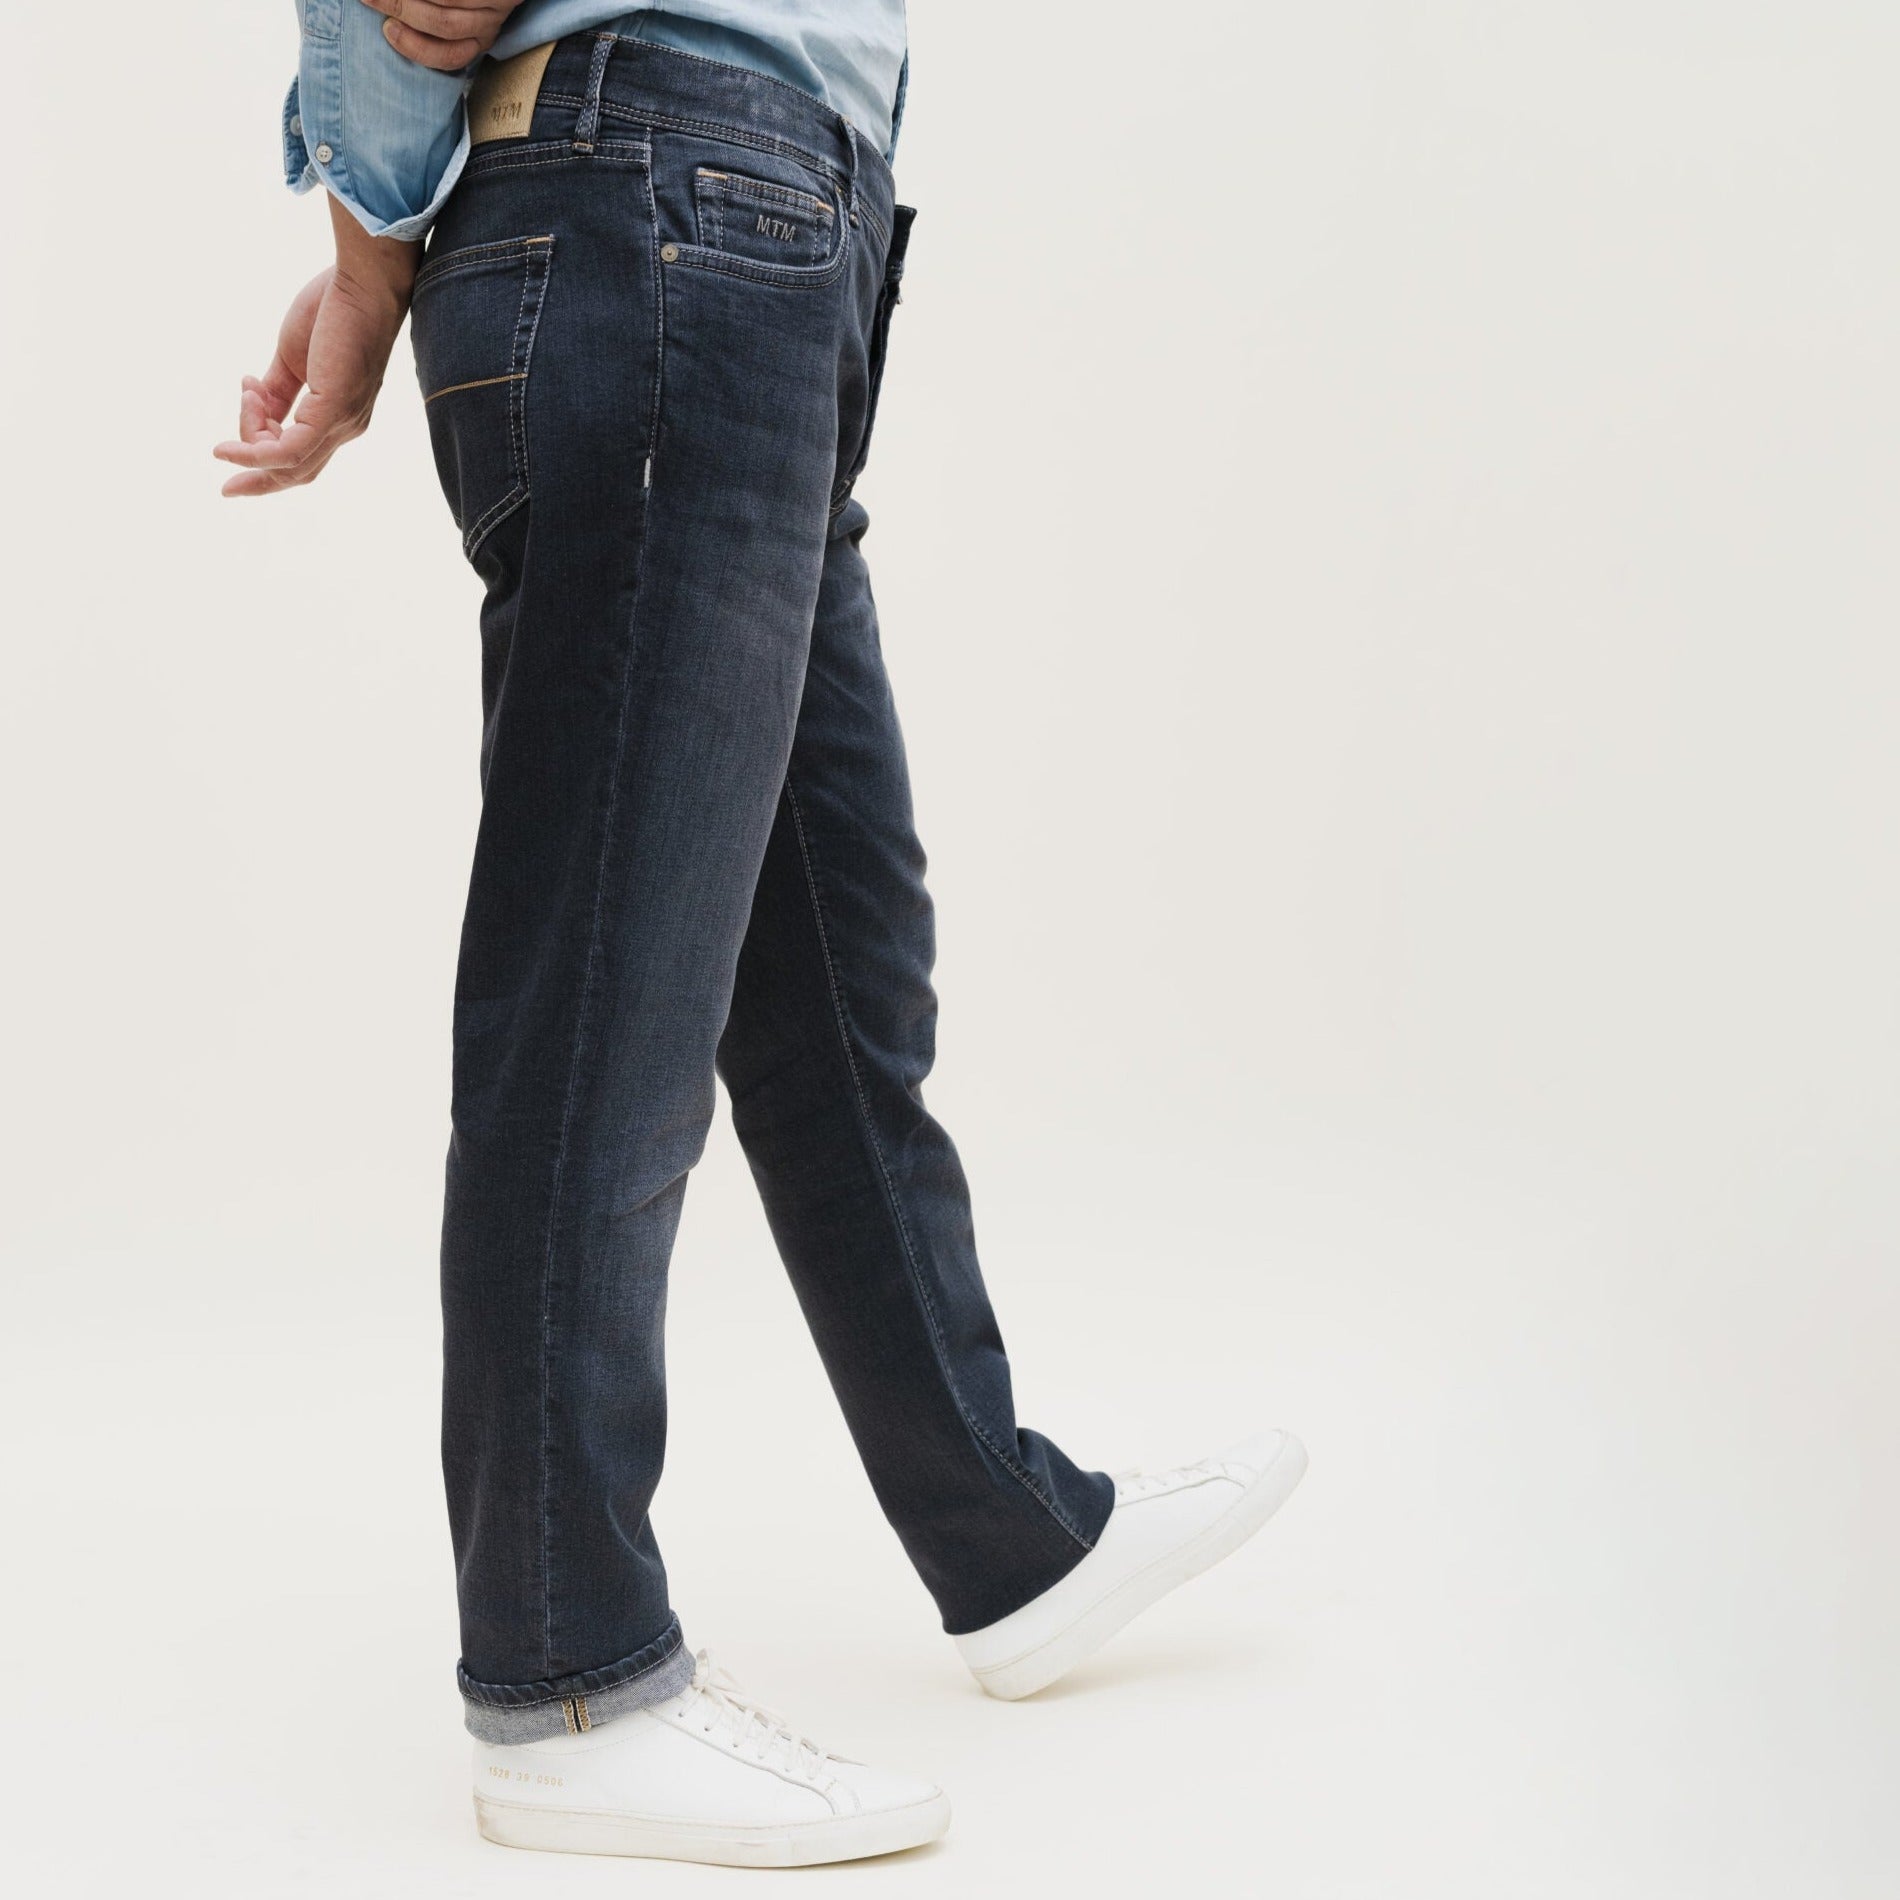 [title] by NEW TAILOR - EST. 1997 (Jeans) | NEW TAILOR Webshopp